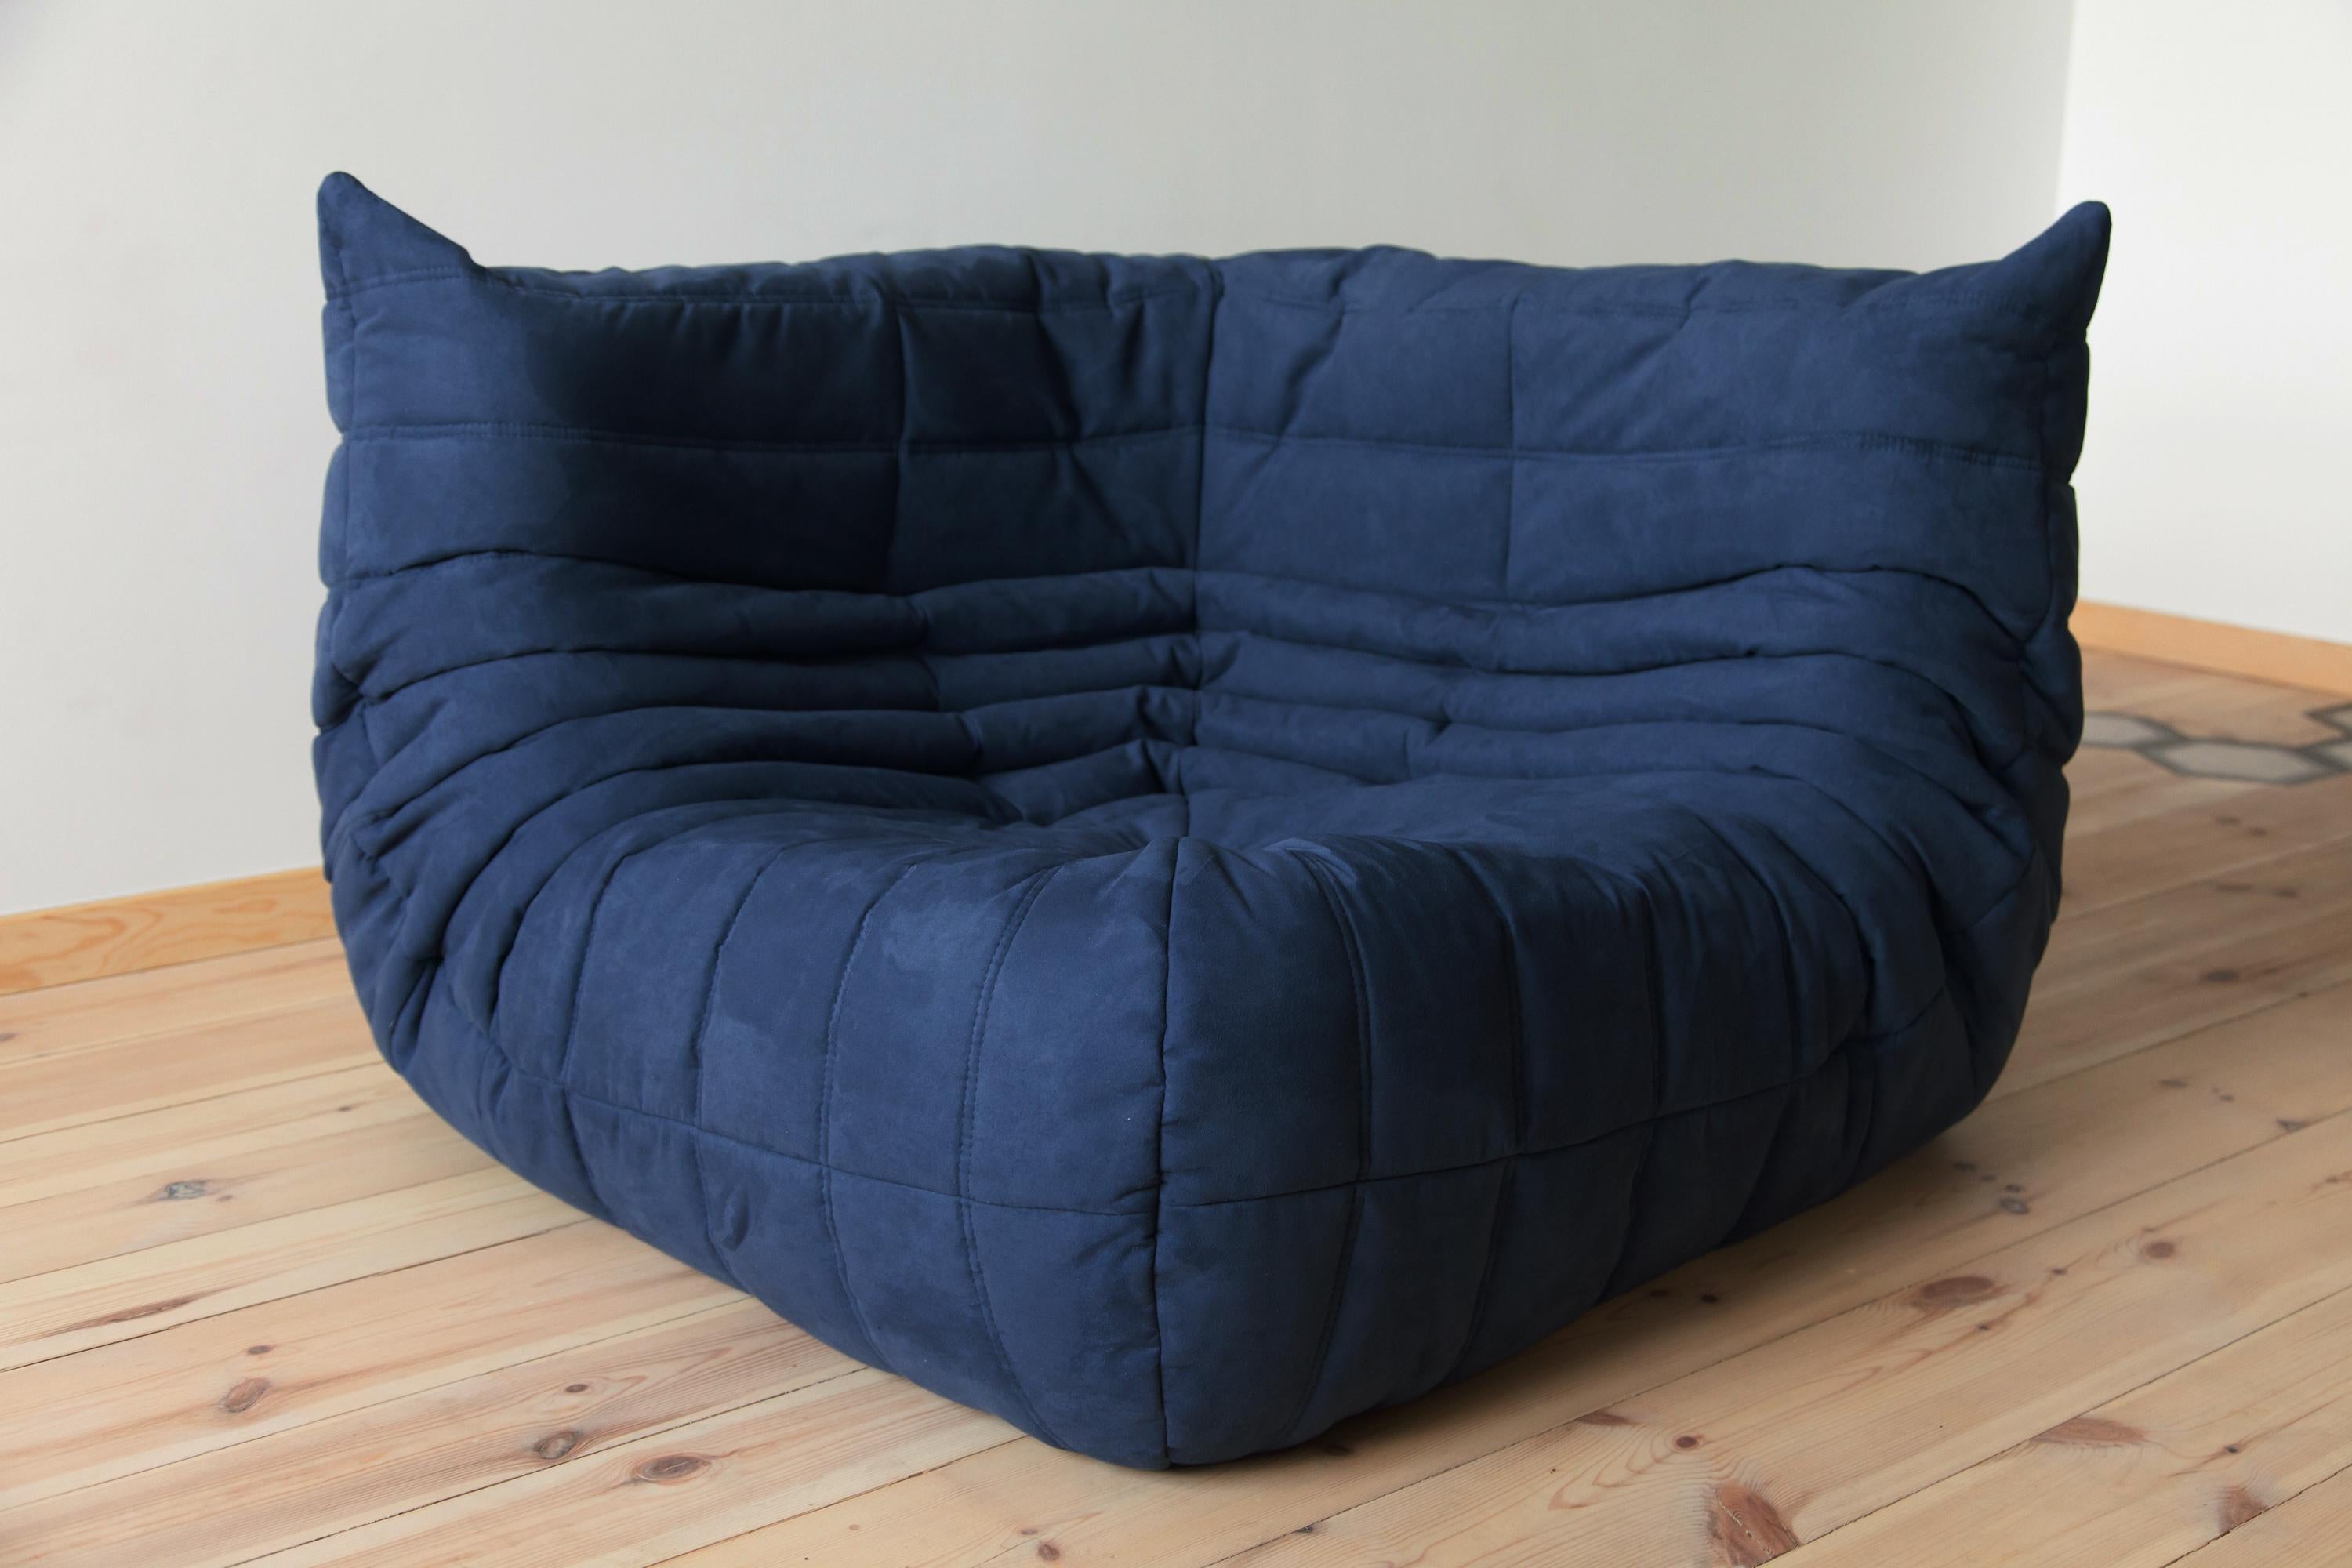 This Togo corner couch was designed by Michel Ducaroy in 1973 and was manufactured by Ligne Roset in France. It has been reupholstered in new dark blue microfibre (102 x 102 x 70 cm). It has the original Ligne Roset logo and genuine Ligne Roset